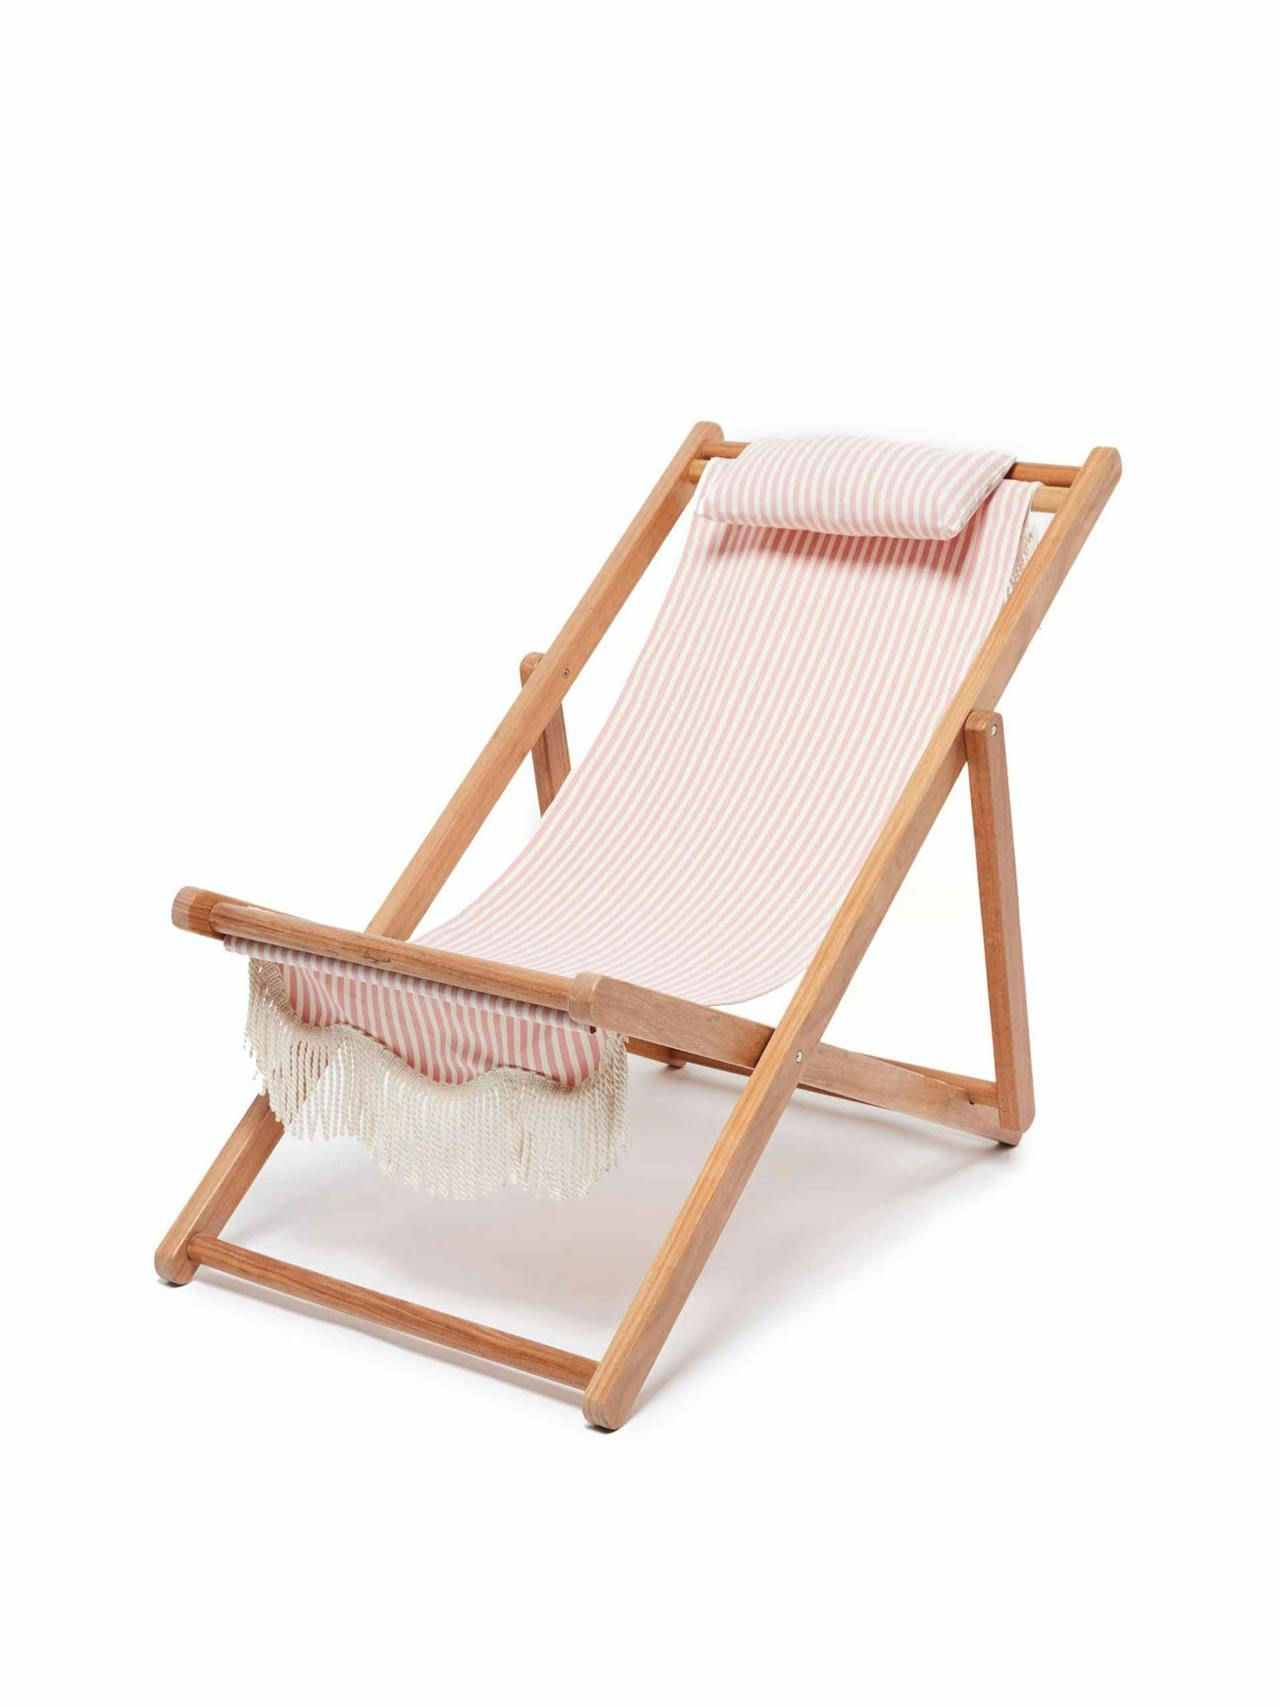 Pink and white striped deckchair